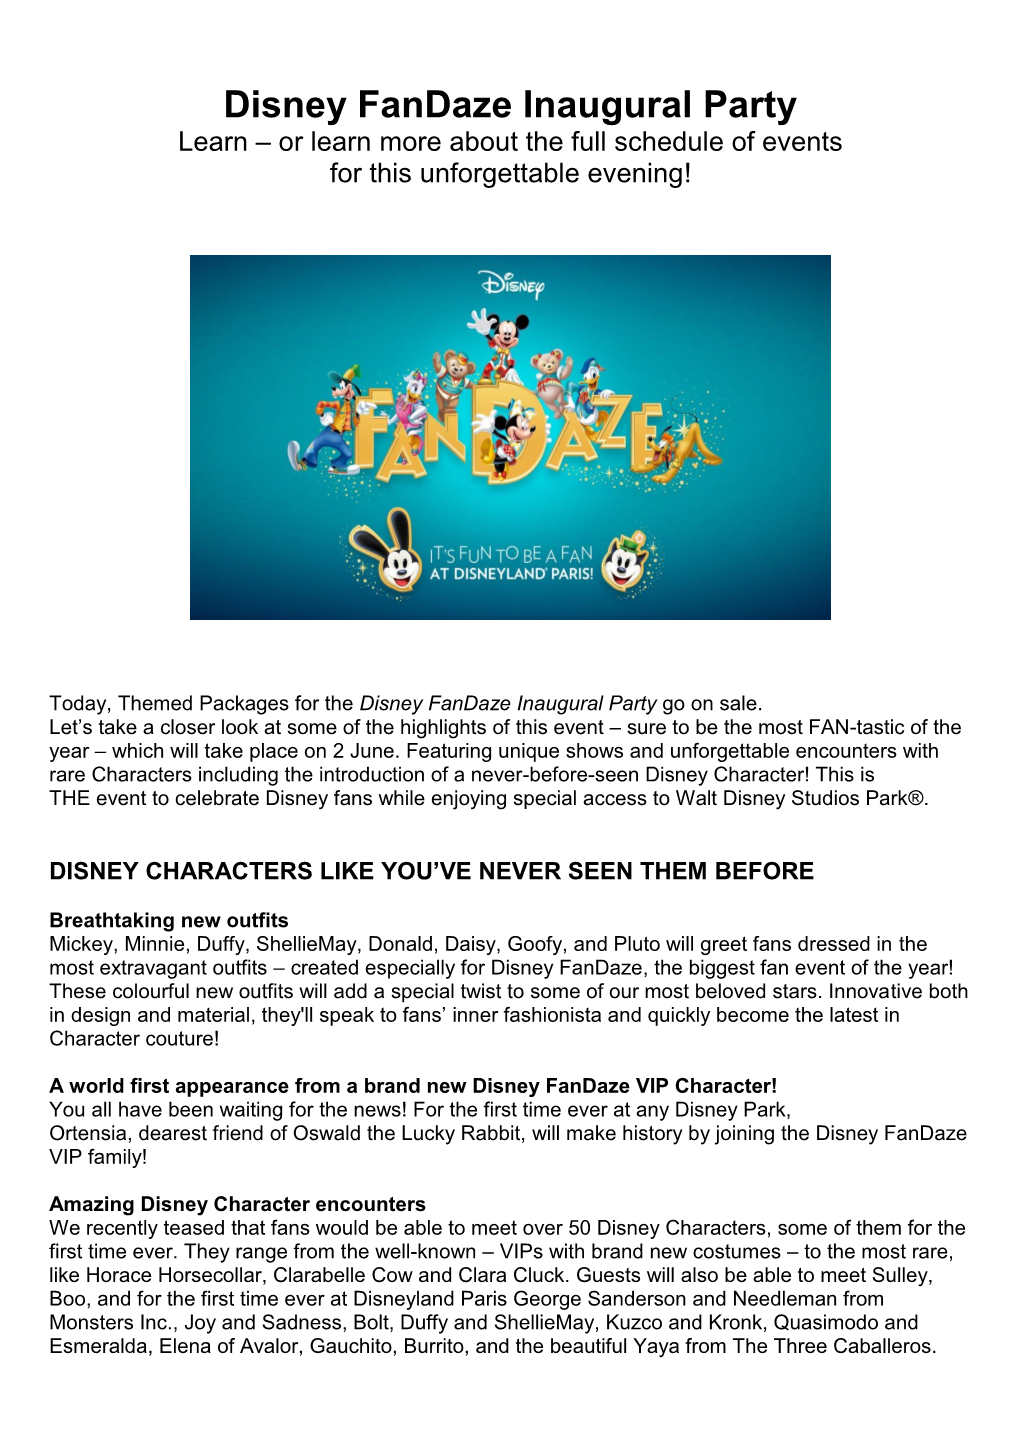 Disney Fandaze Inaugural Party Learn – Or Learn More About the Full Schedule of Events for This Unforgettable Evening!